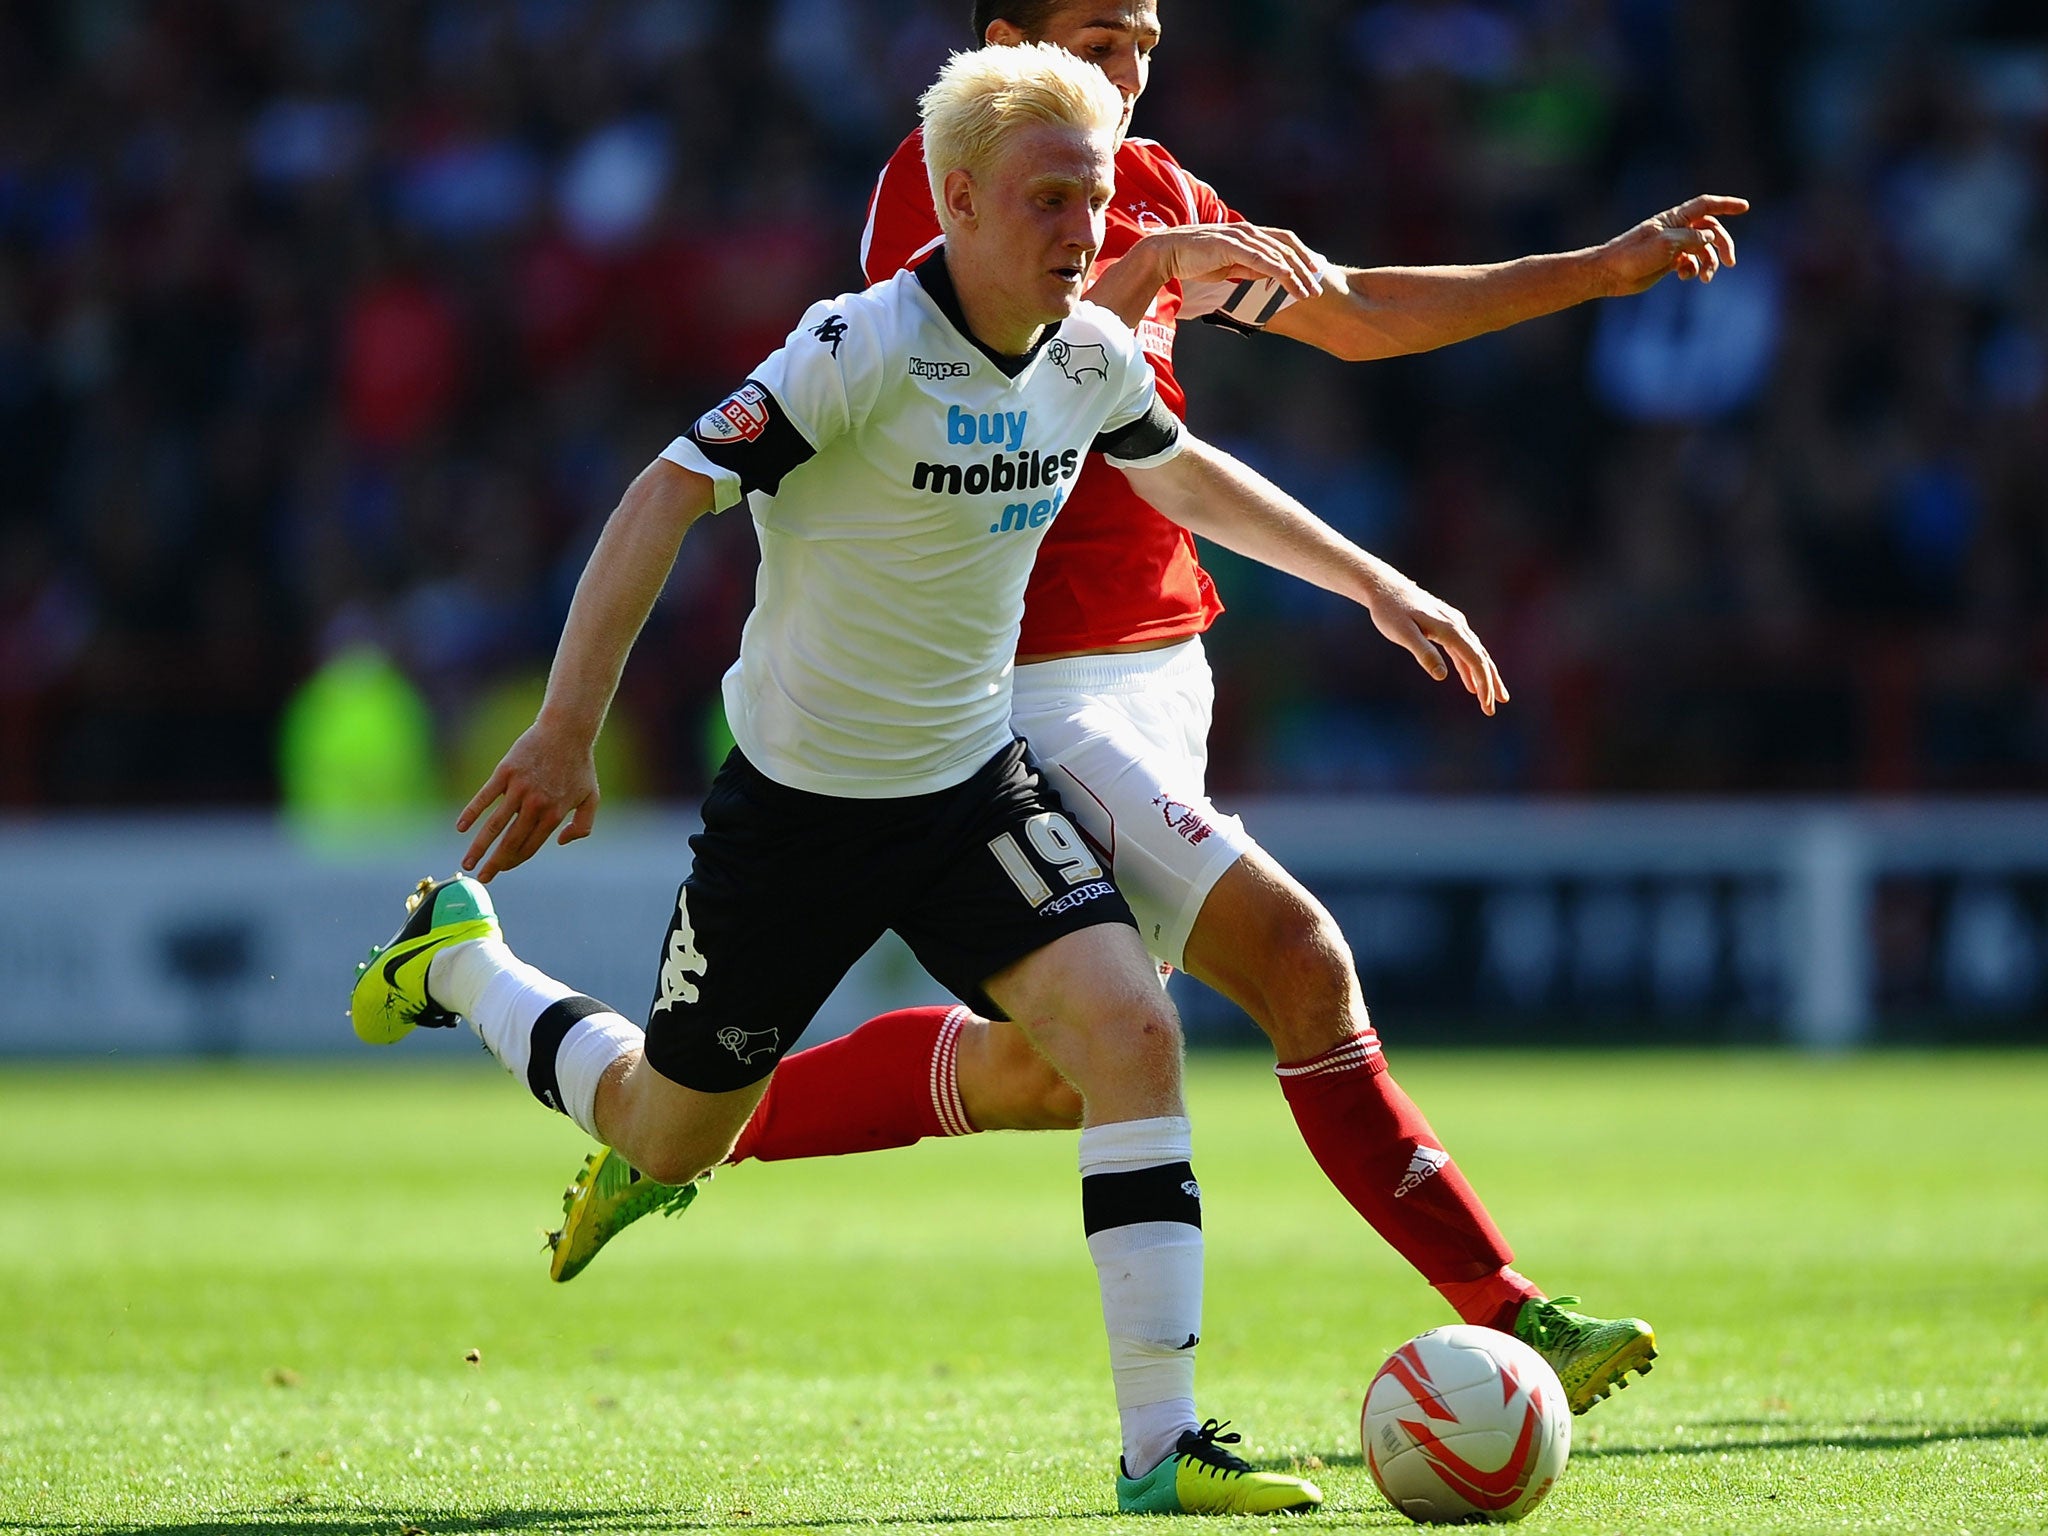 Will Hughes of Derby County battles with Chris Cohen of Nottingham Forest